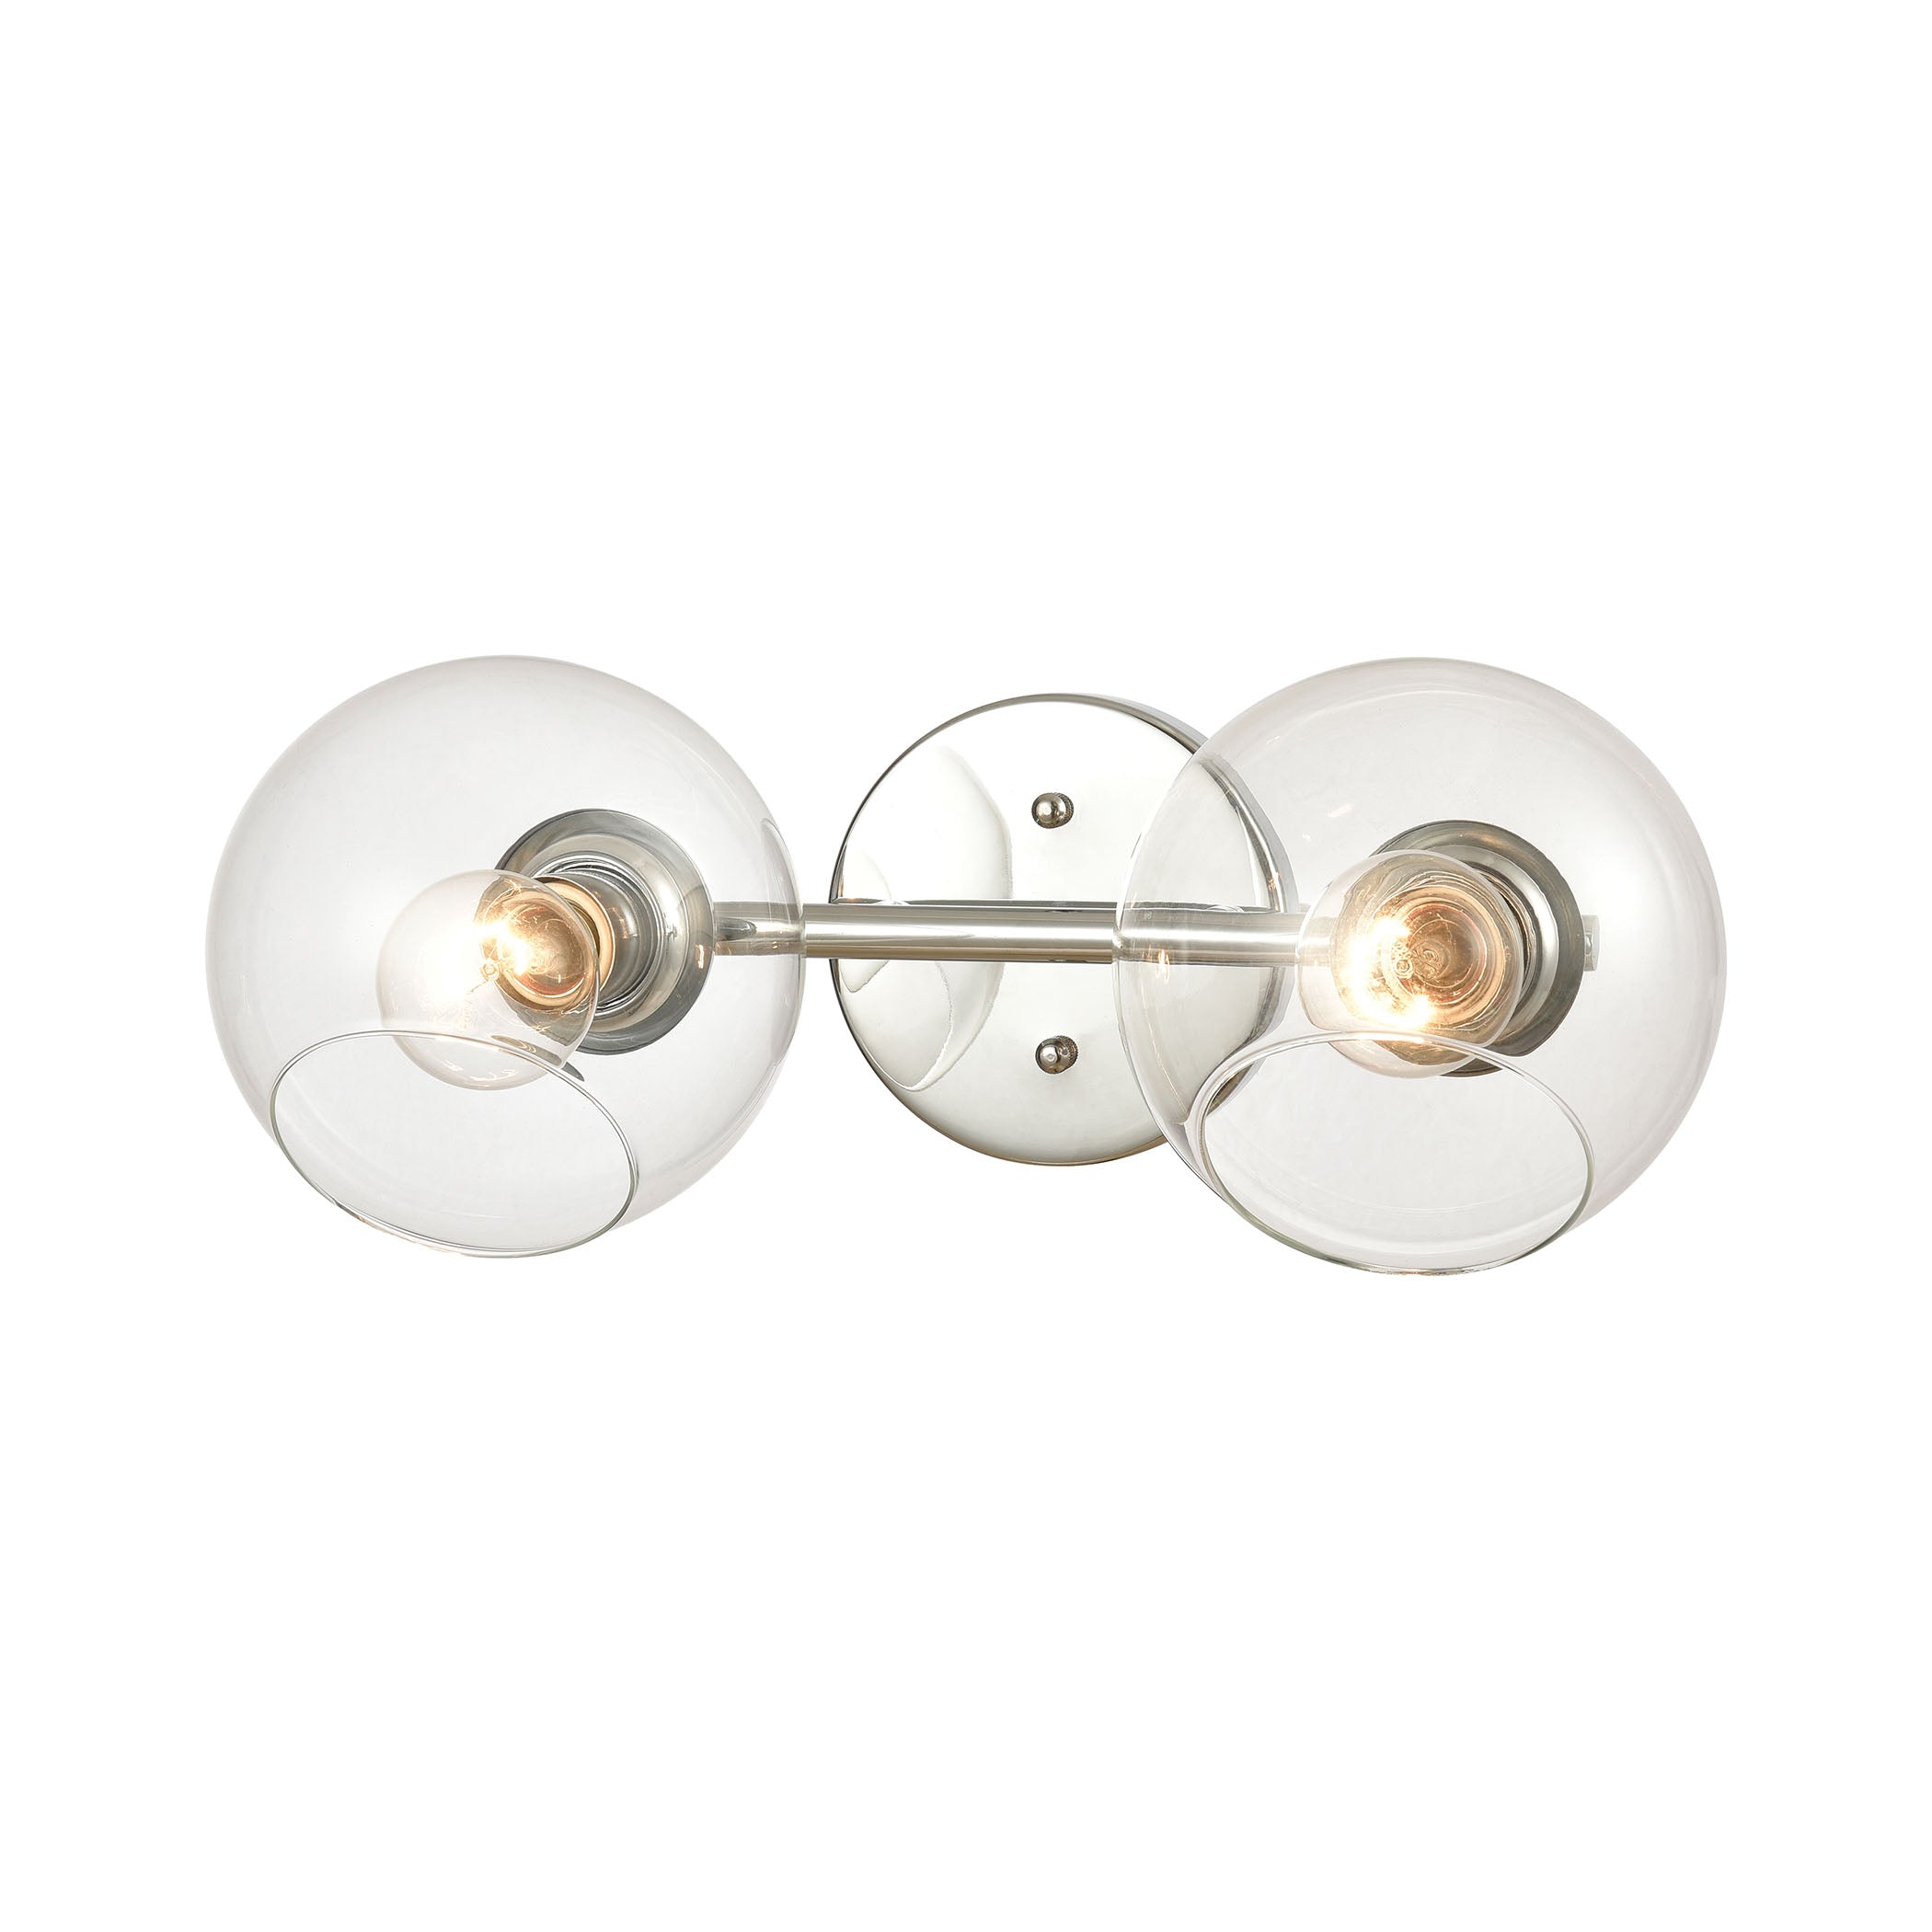 ELK Lighting 18374/2 Claro 2-Light Vanity Light in Polished Chrome with Clear Glass